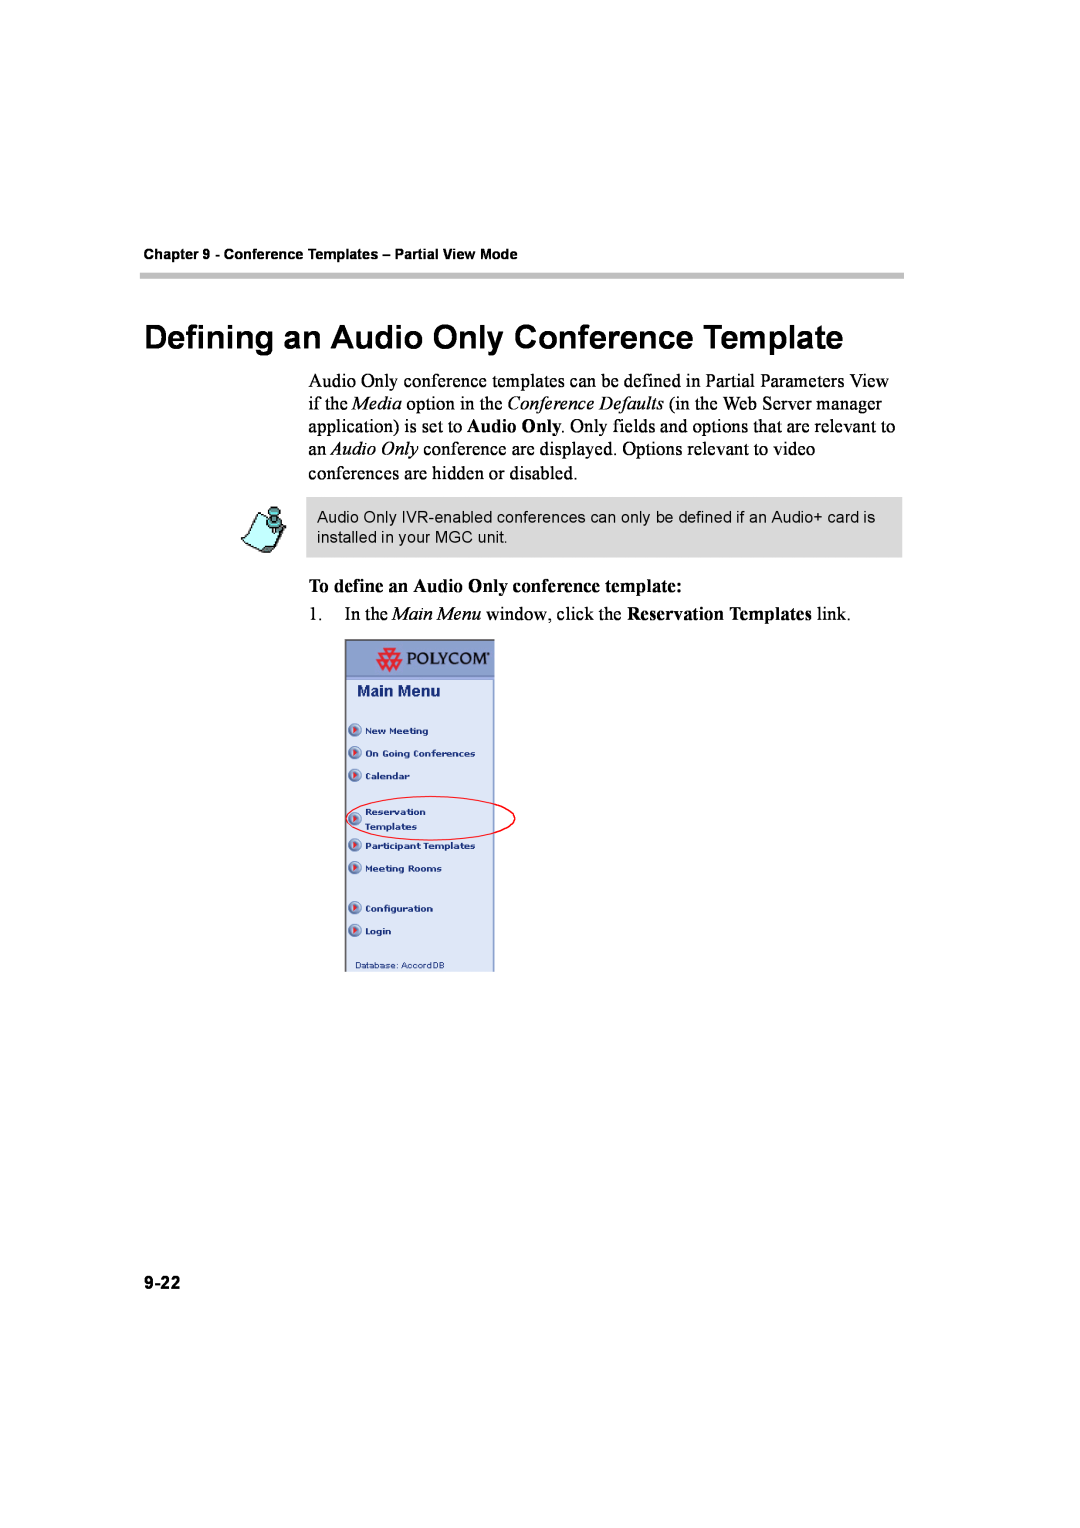 Polycom 8 manual Defining an Audio Only Conference Template, To define an Audio Only conference template 